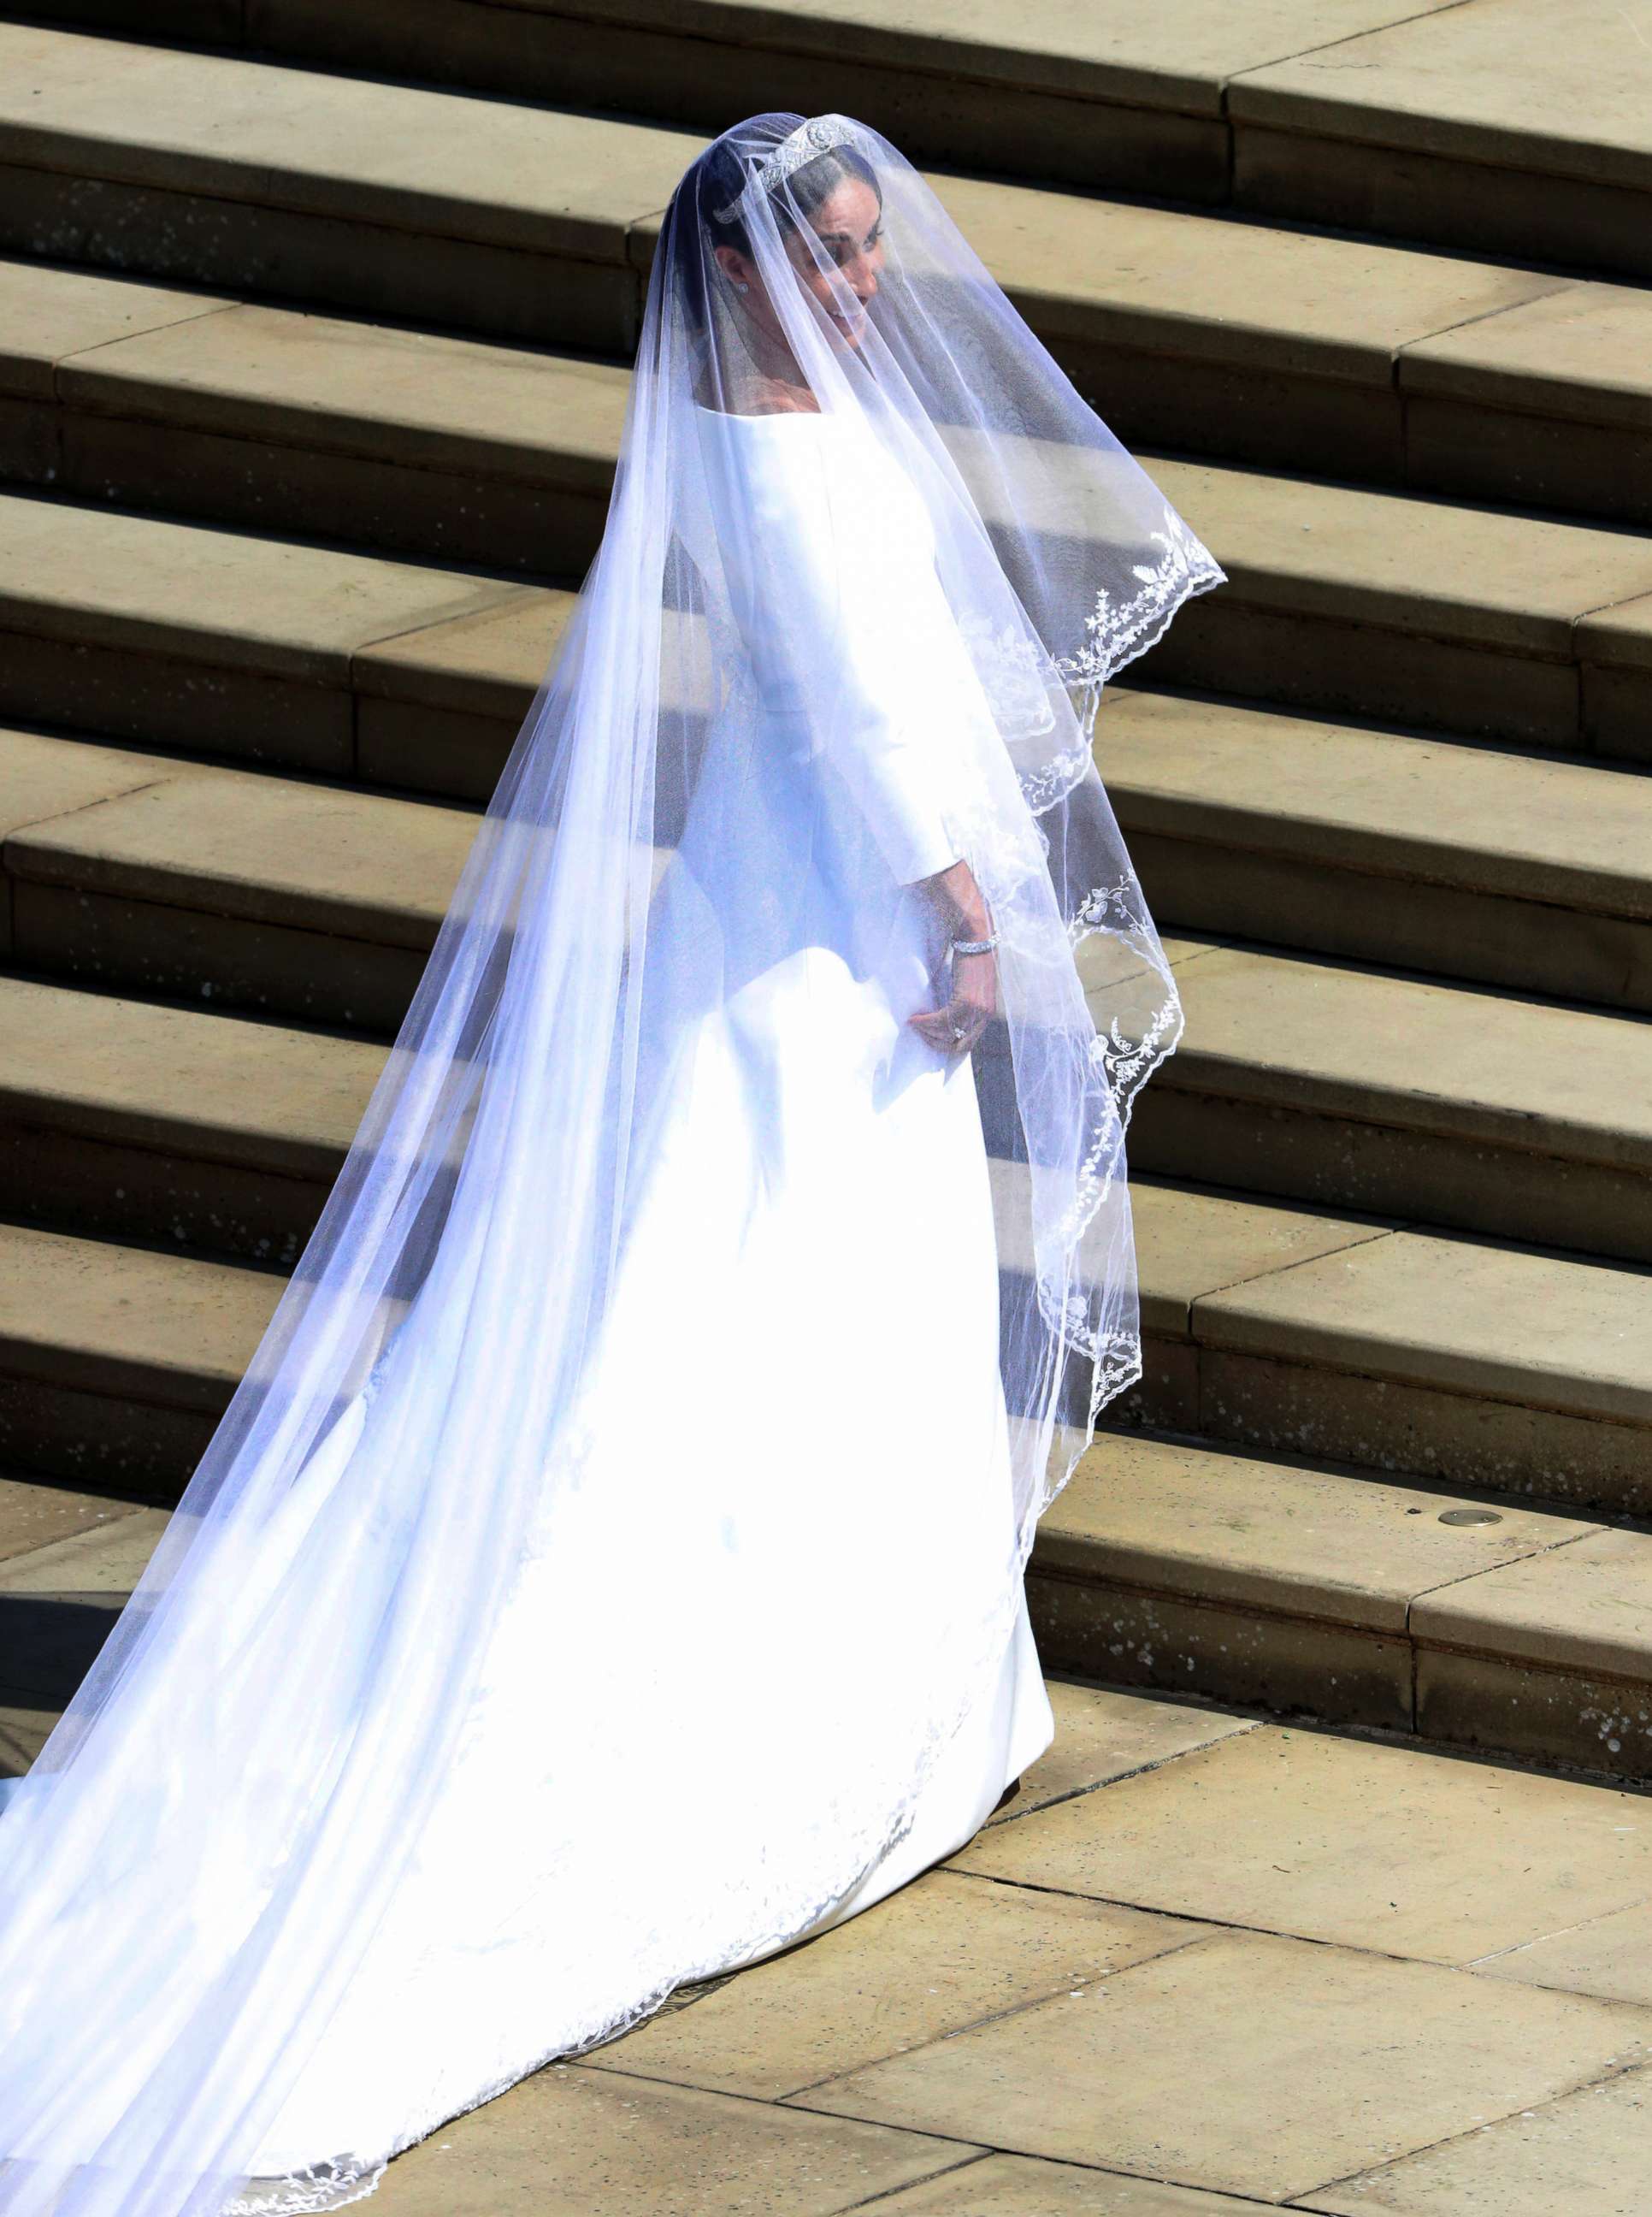 PHOTO: Meghan Markle arrives for the wedding ceremony of Prince Harry and Meghan Markle at St. George's Chapel in Windsor Castle in Windsor, May 19, 2018.